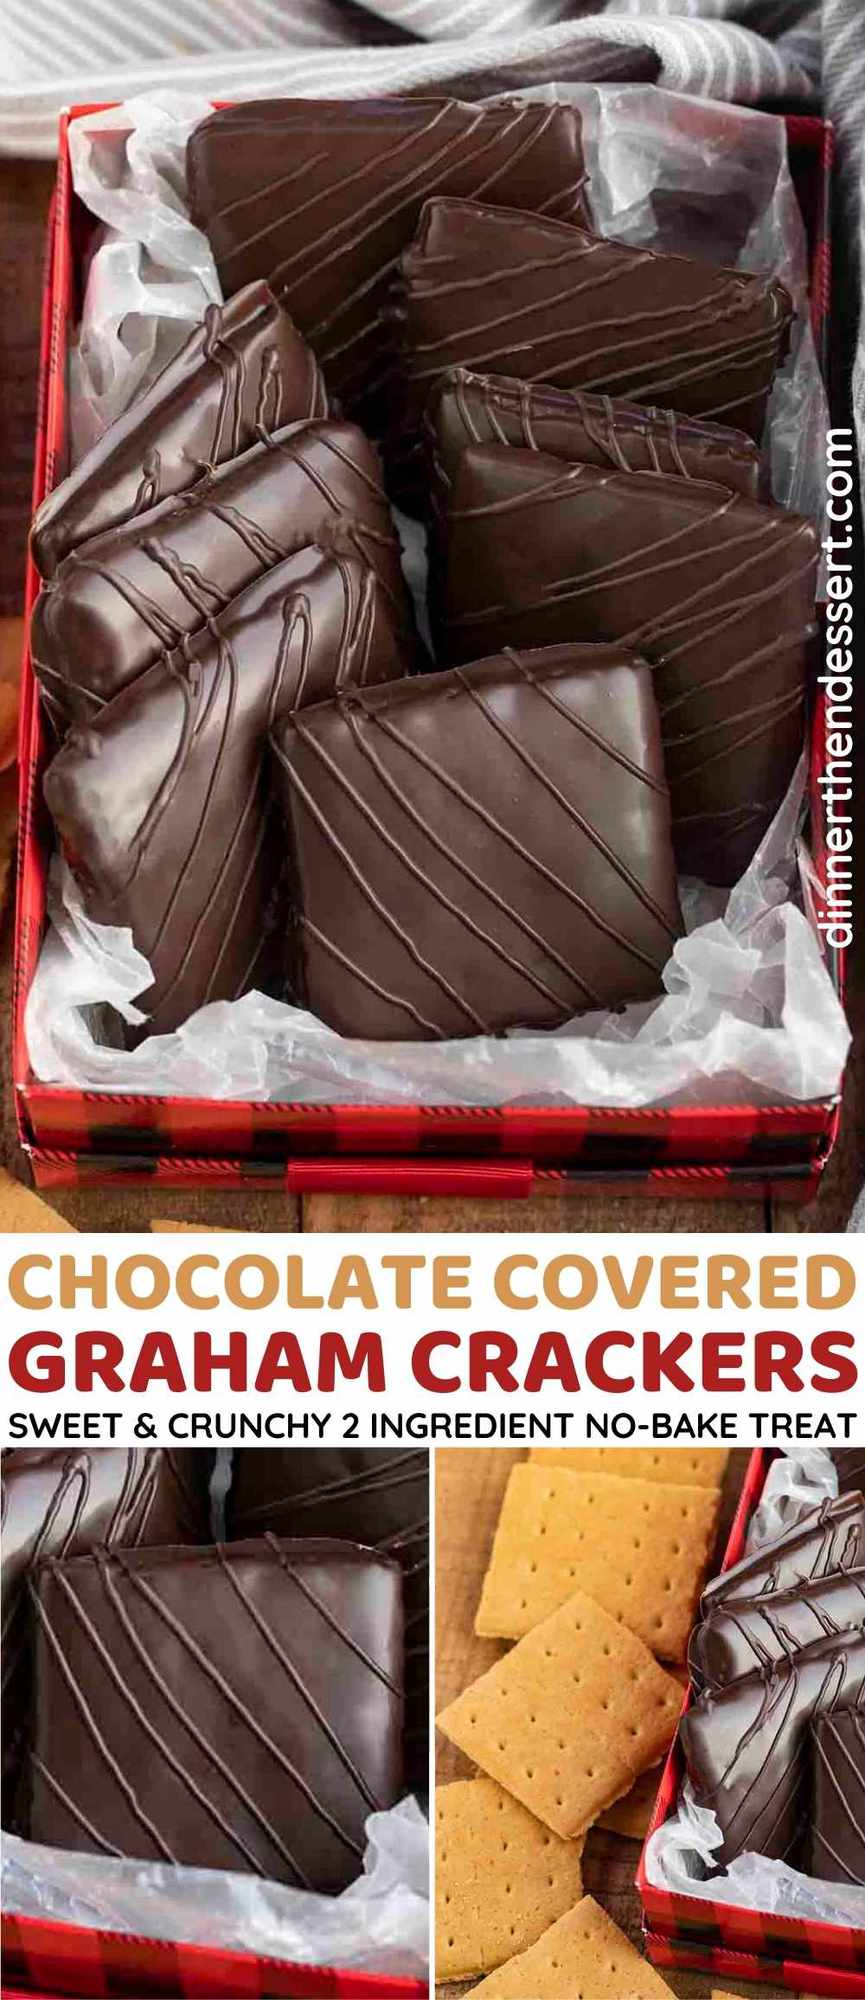 Chocolate Covered Graham Crackers Collage